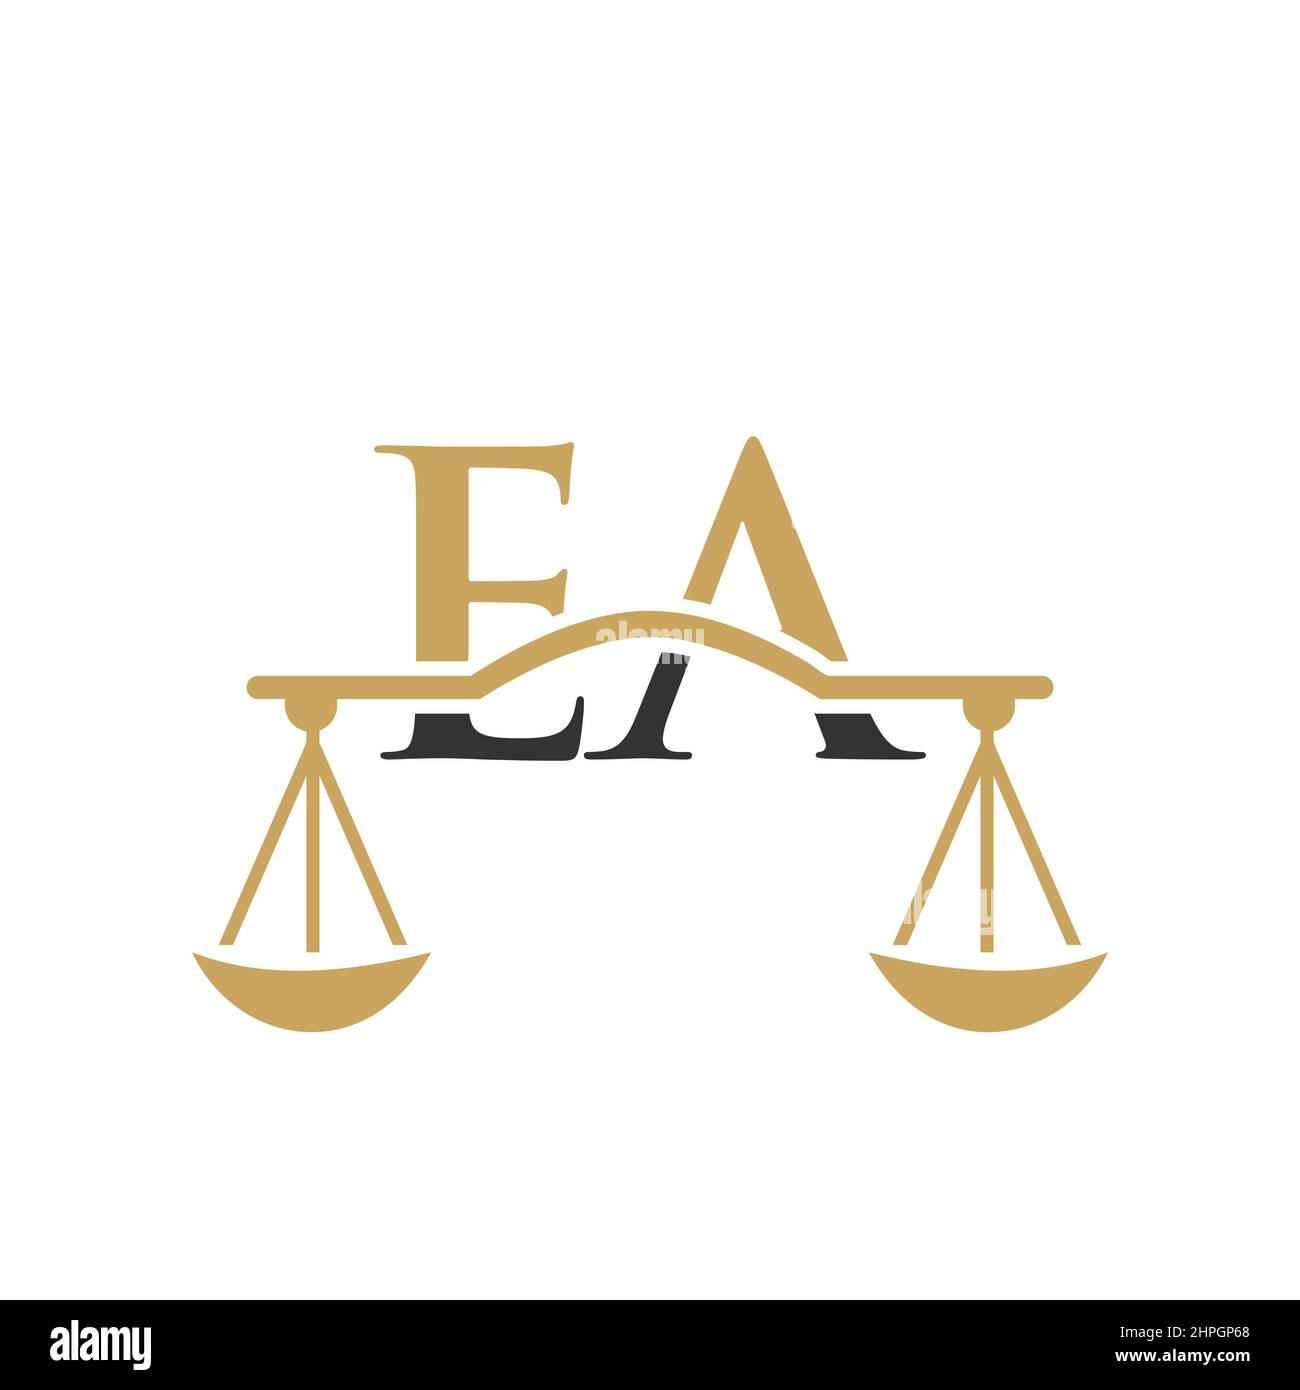 Law Firm Letter EA Logo Design. Lawyer, Law Attorney Lawyer Service, Law Office, Scale. Law Firm Logo On Letter EA Vector Sign Stock Vector